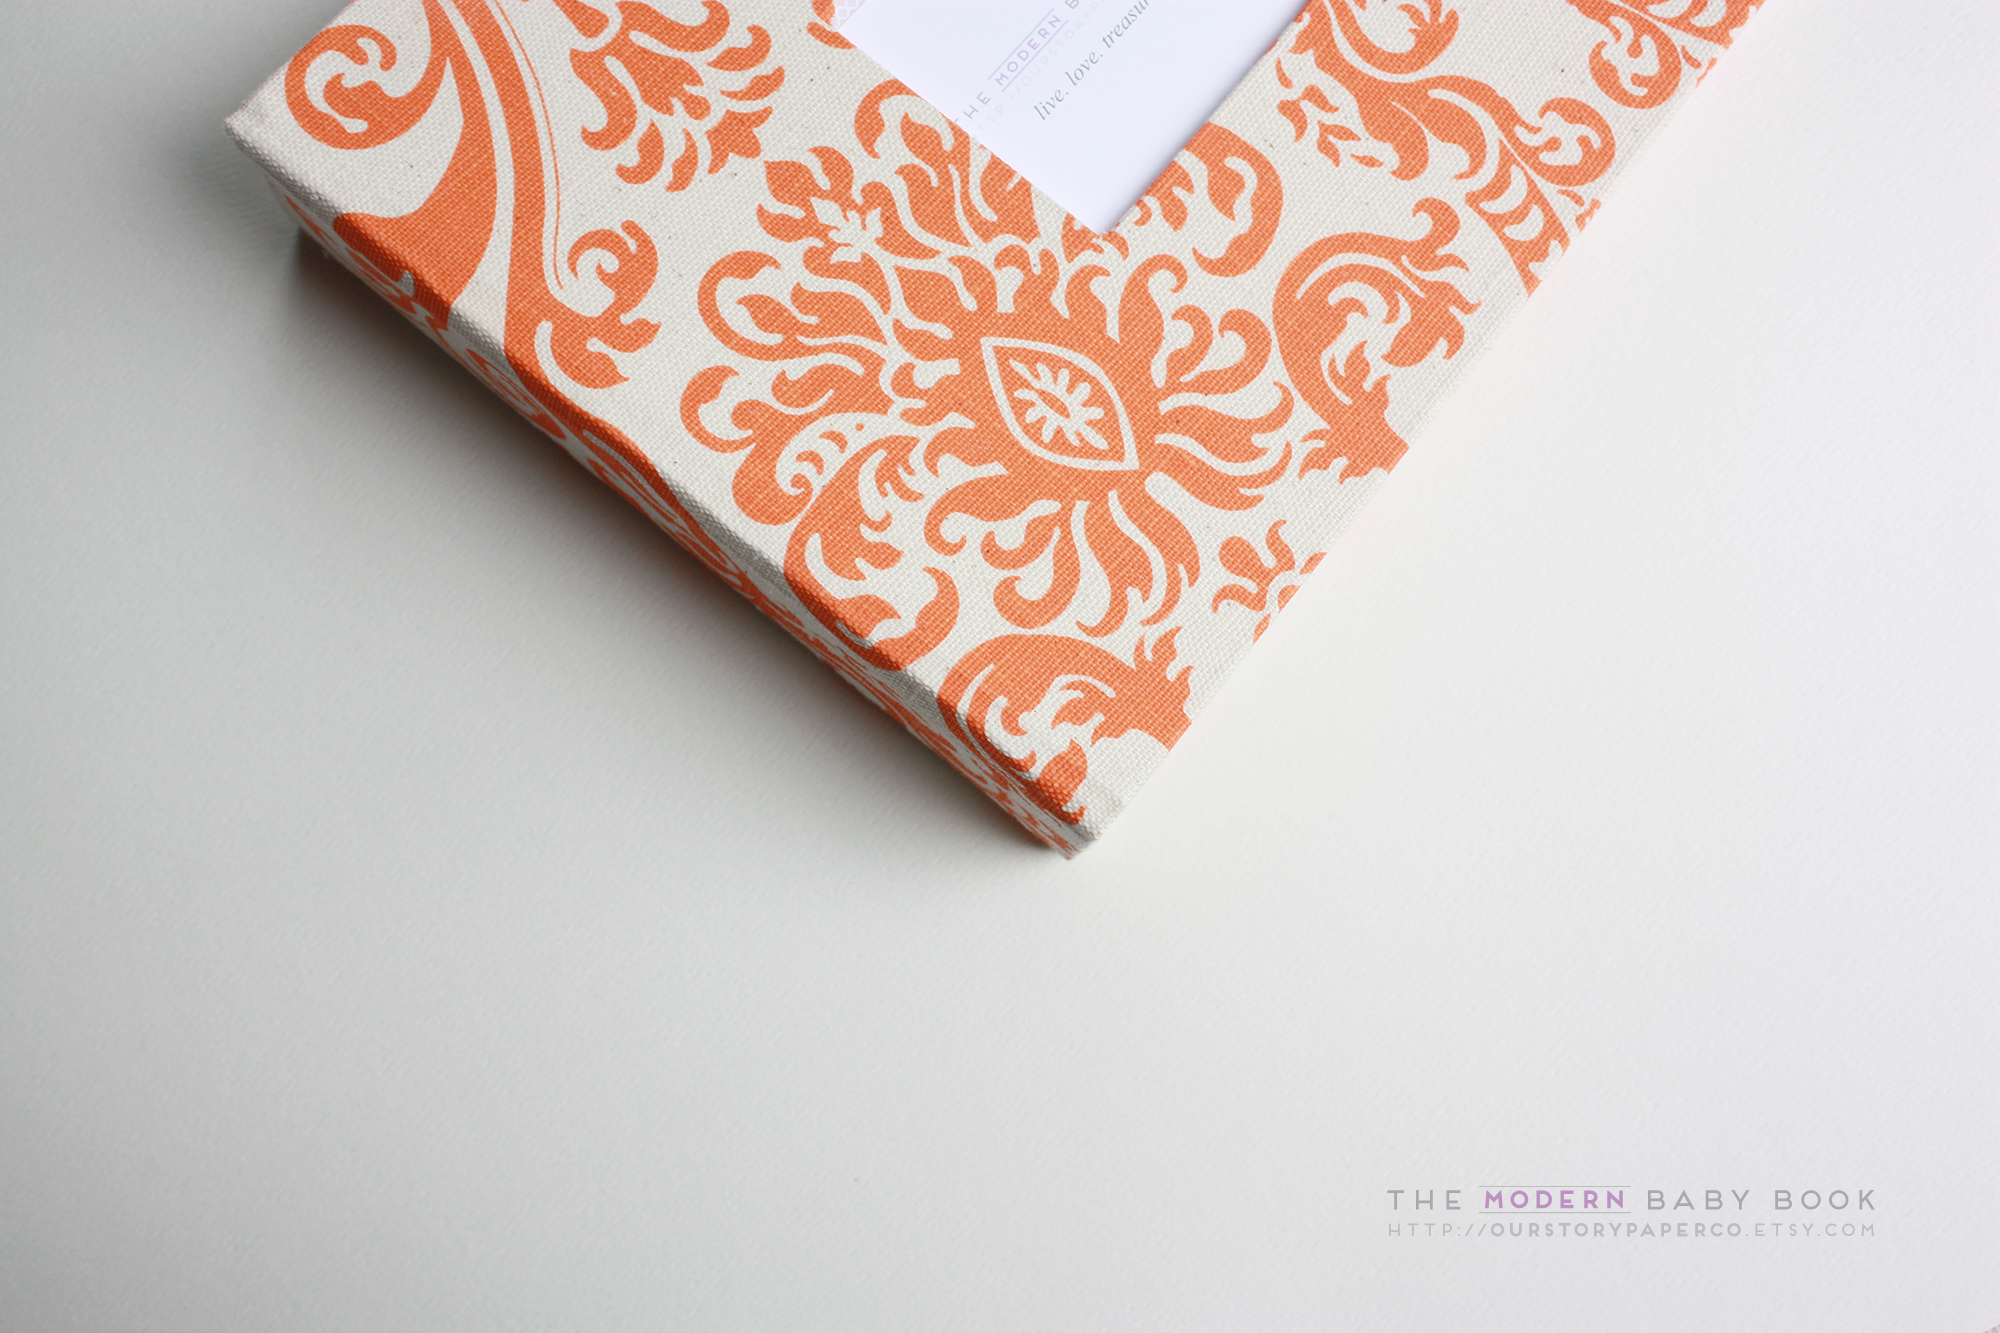 Tagnerine Linen Damask Modern Baby Book - Our Story Paper Co.